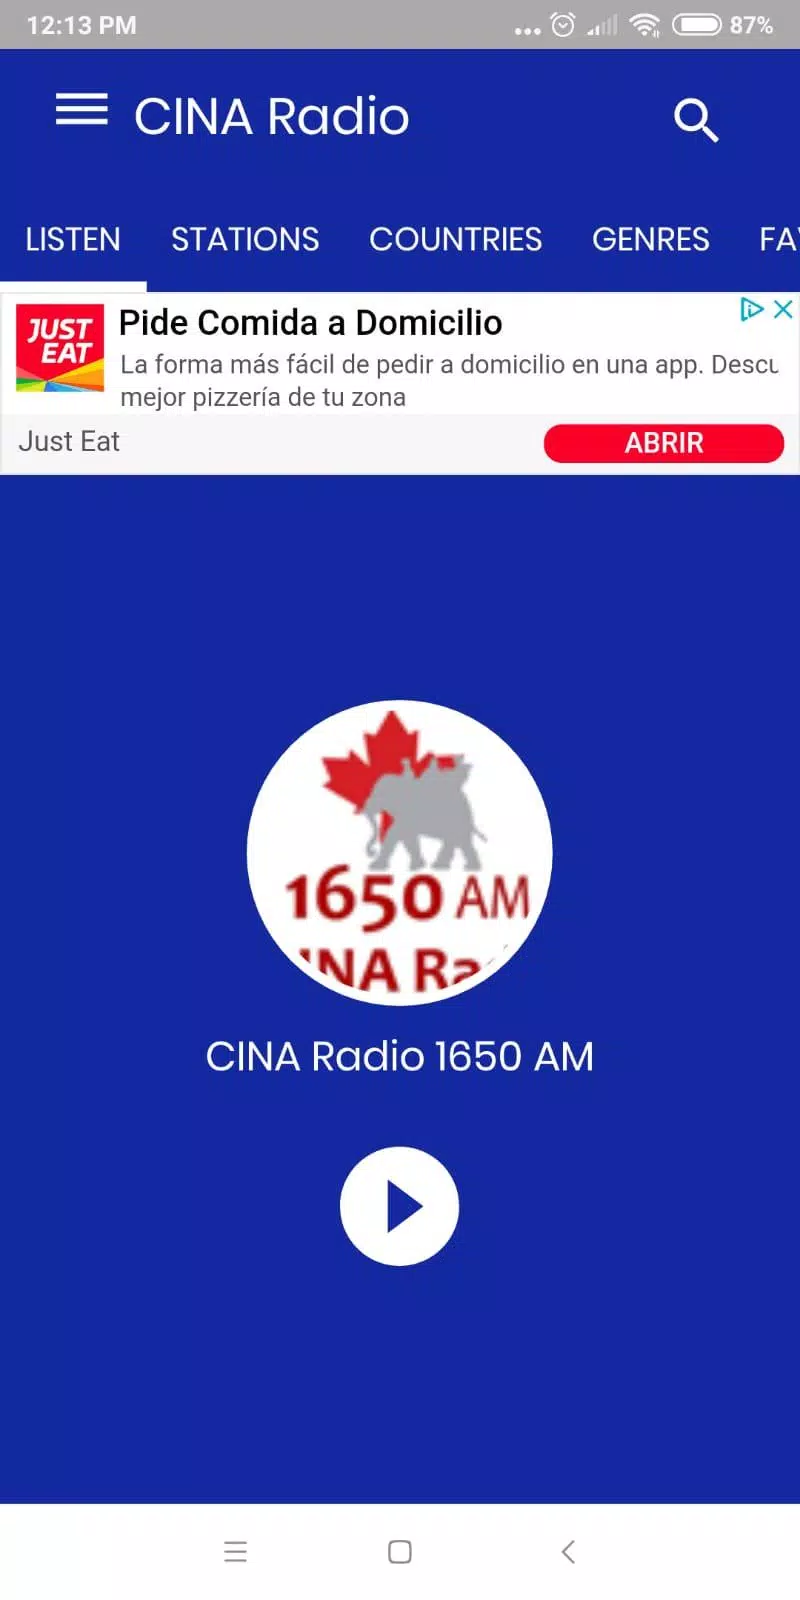 1650 CINA Radio for Android - APK Download